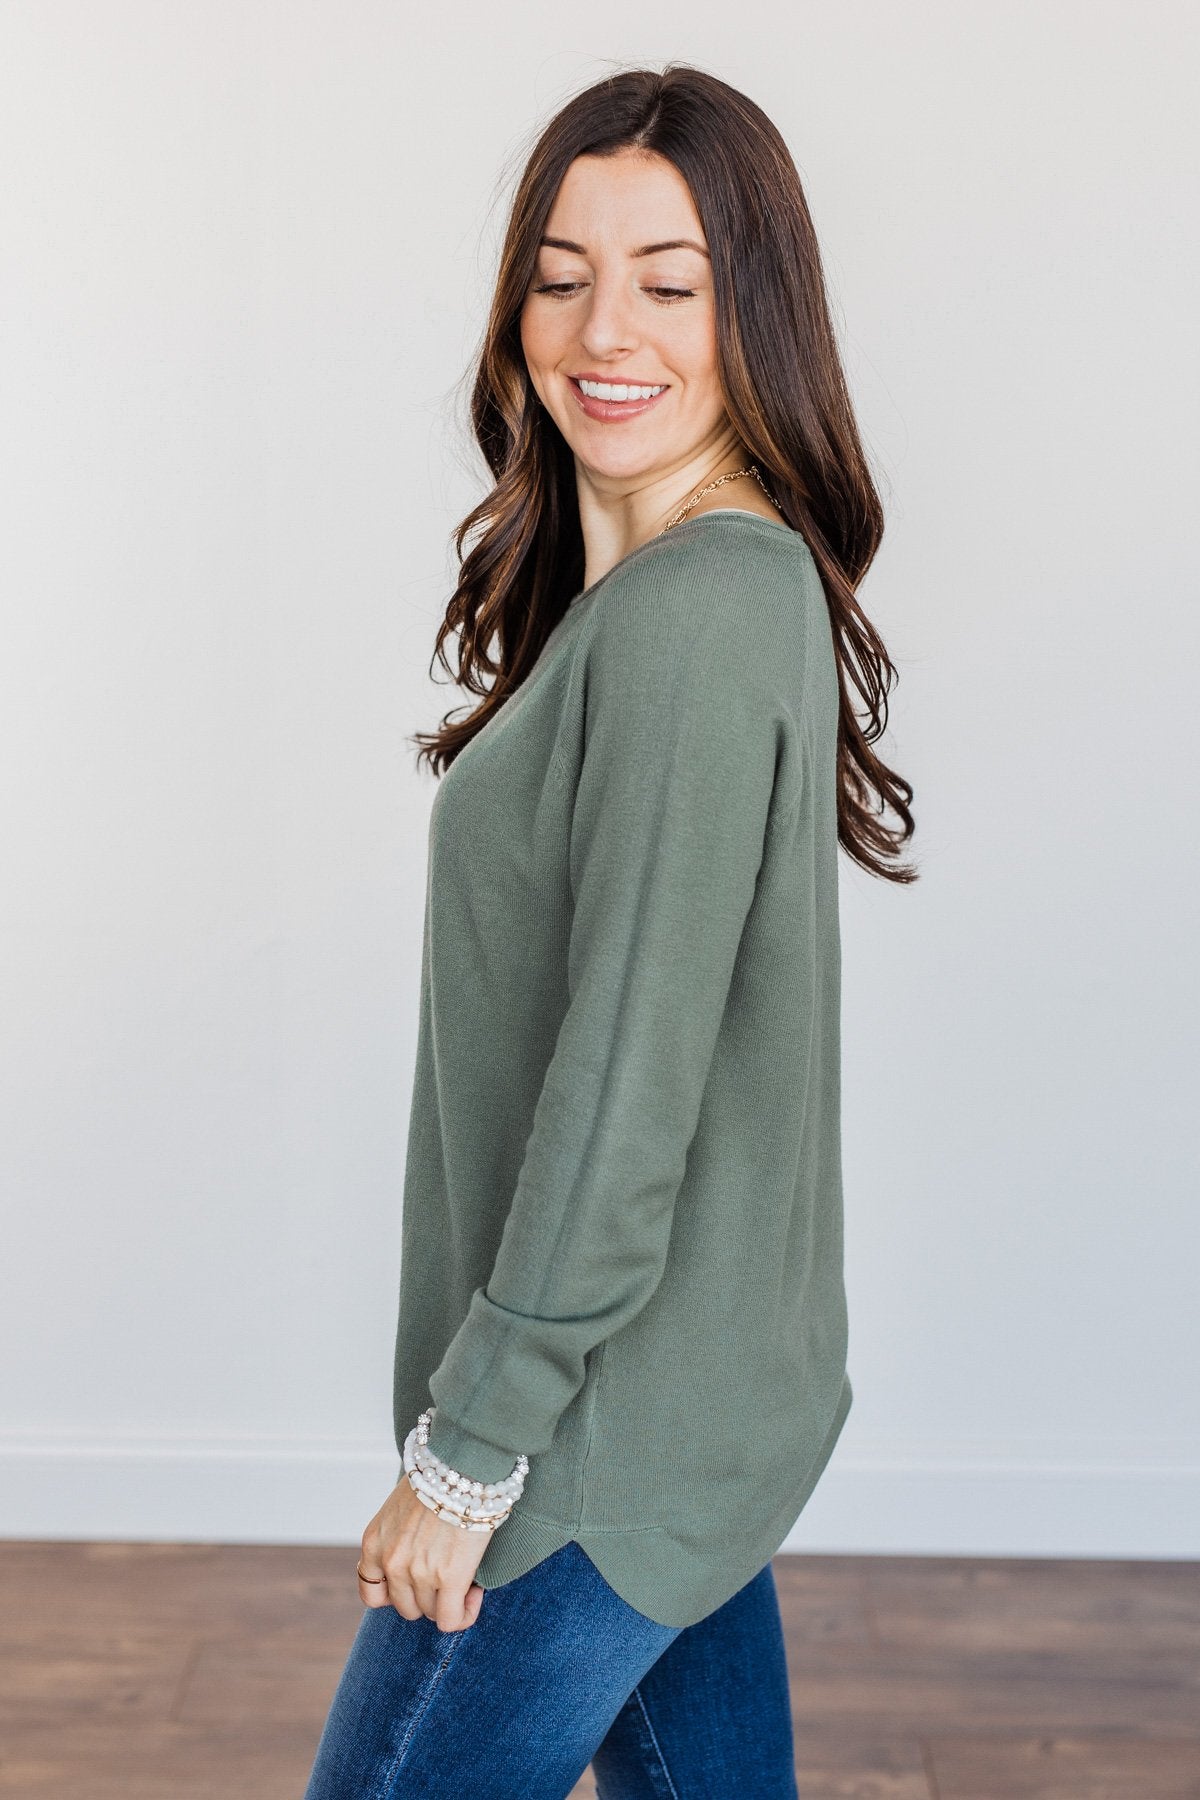 Butter Me Up Knit Sweater- Dusty Jade